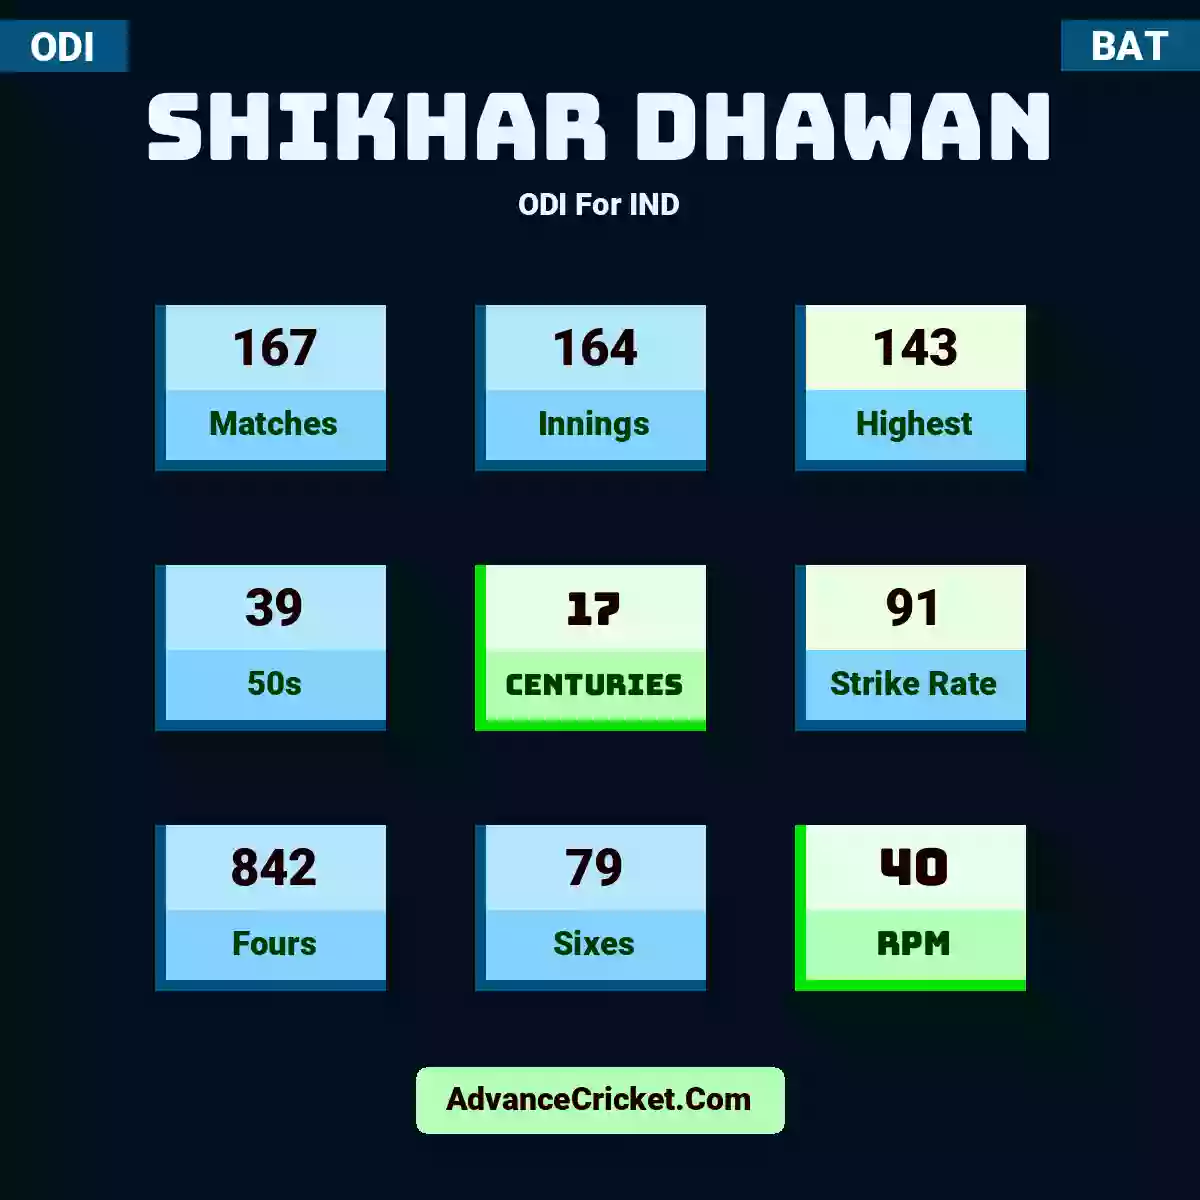 Shikhar Dhawan ODI  For IND, Shikhar Dhawan played 167 matches, scored 143 runs as highest, 39 half-centuries, and 17 centuries, with a strike rate of 91. S.Dhawan hit 842 fours and 79 sixes, with an RPM of 40.